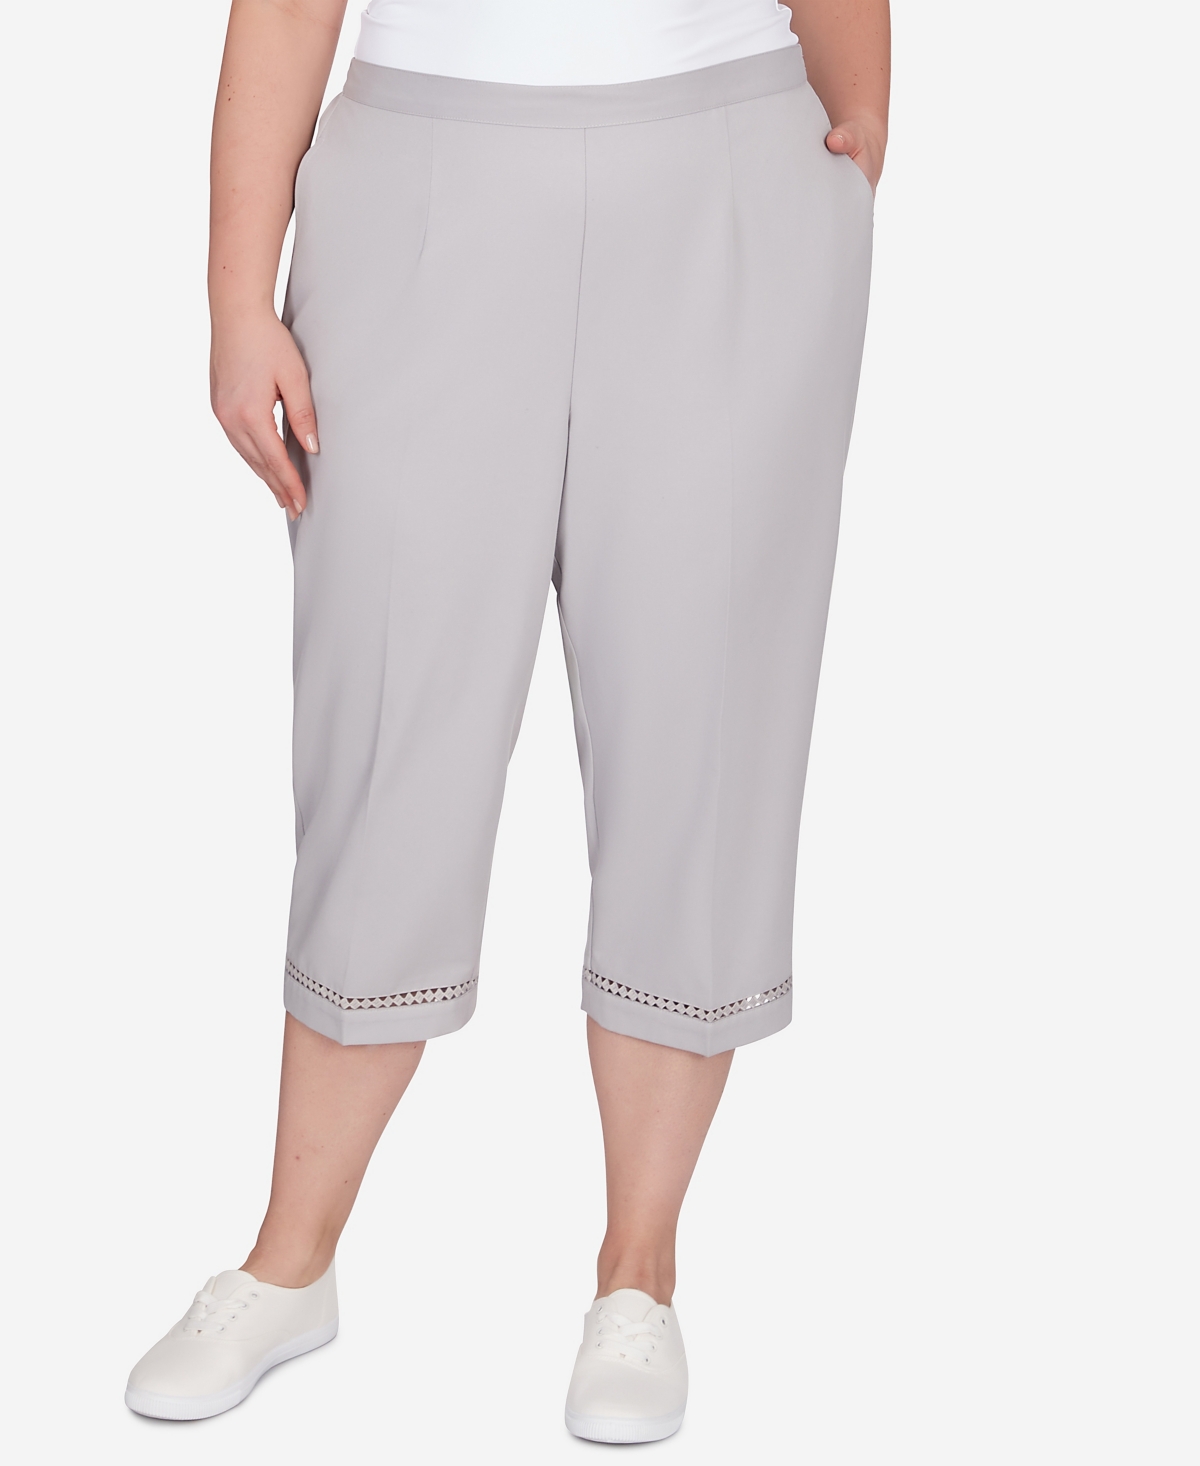 Alfred Dunner Plus Size Charleston Twill Capri Pants With Lace Inset Bottom In Pearl Gray